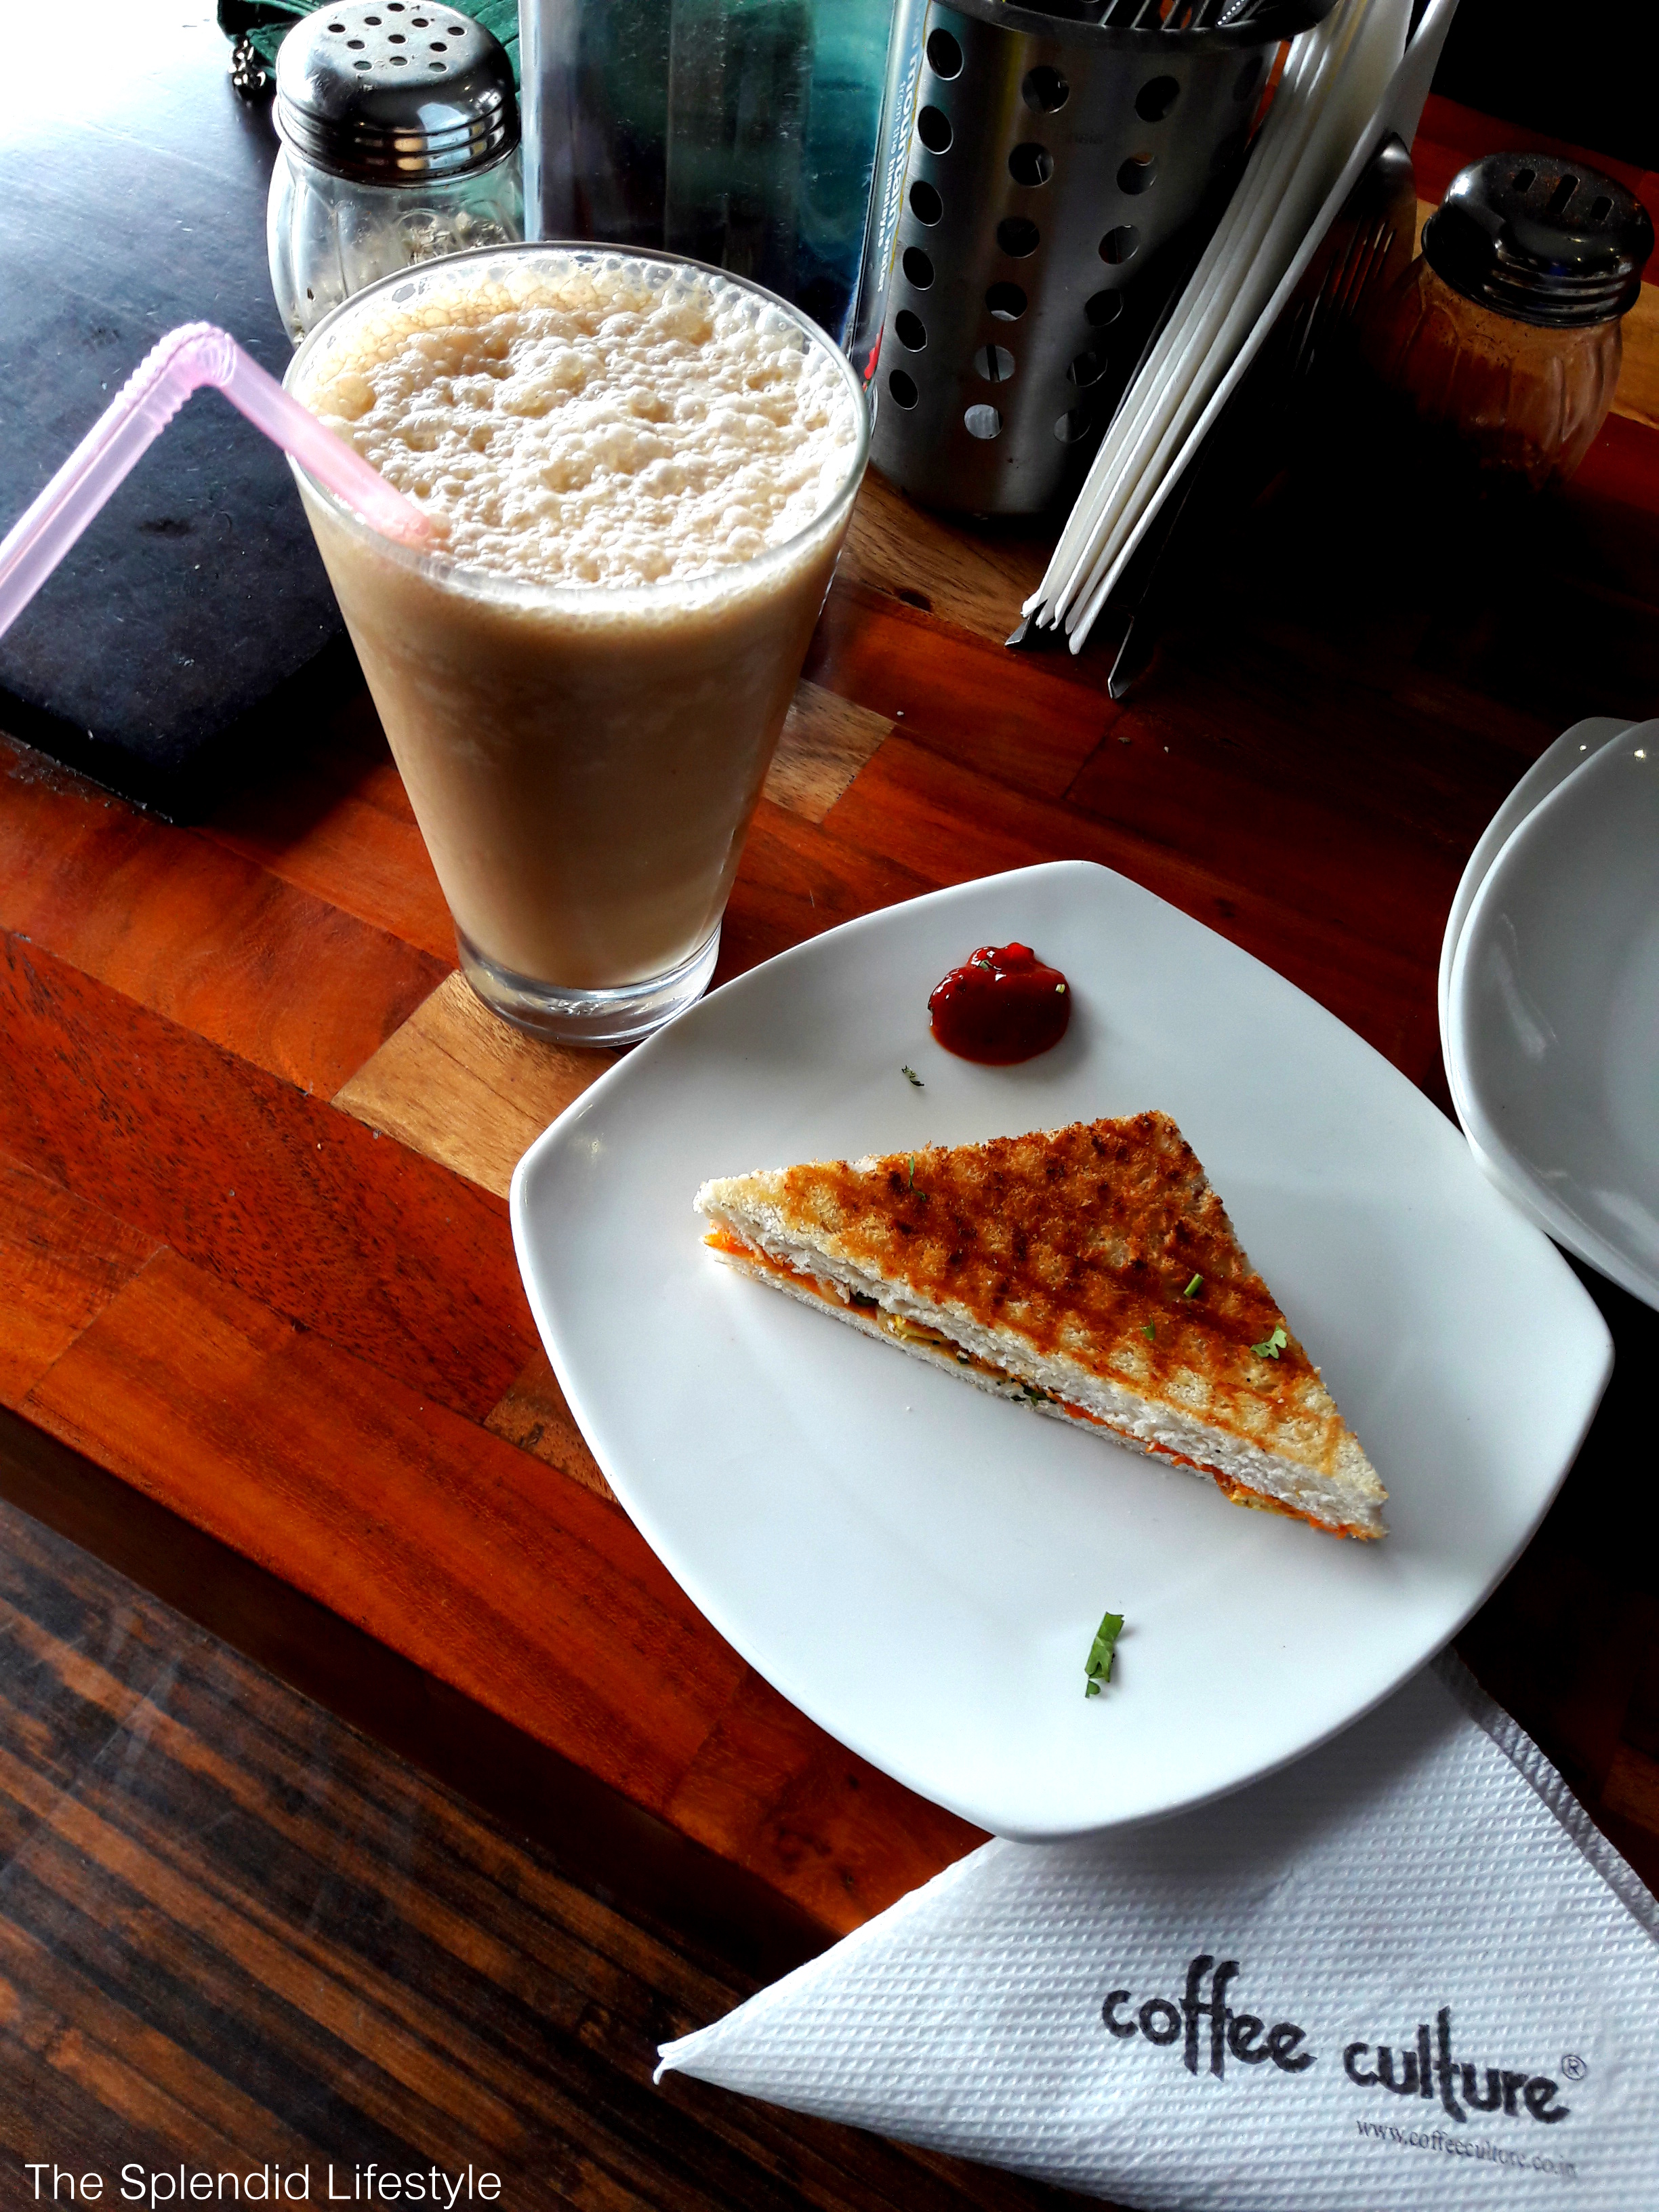 The Coffee Culture – Classy and Cool Coffee Lounge in Lucknow Which Offer Varieties of Vegetarian Foods